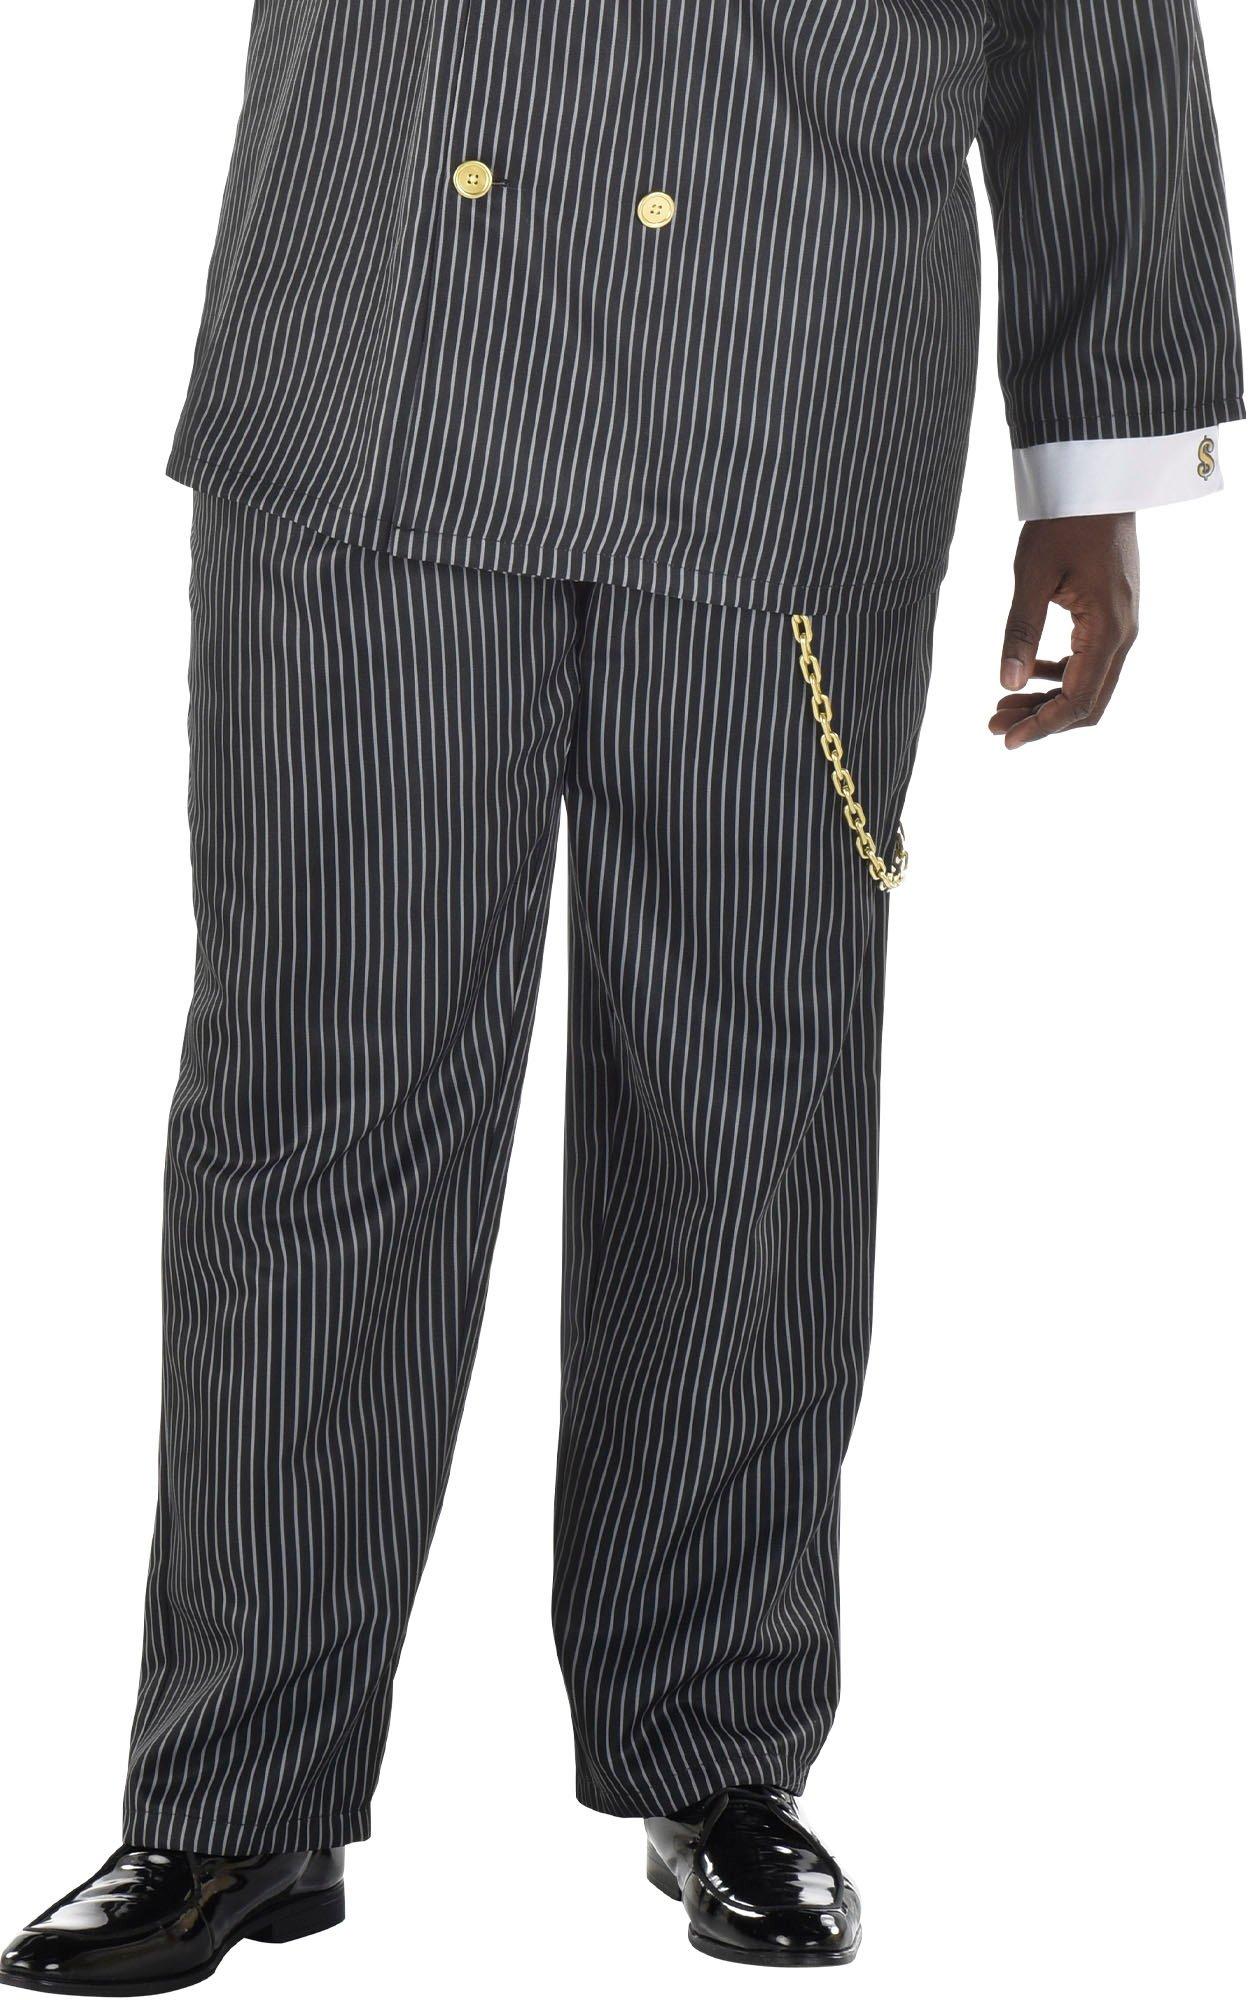 Adult Head Honcho Plus Size Costume - 20s Gangster